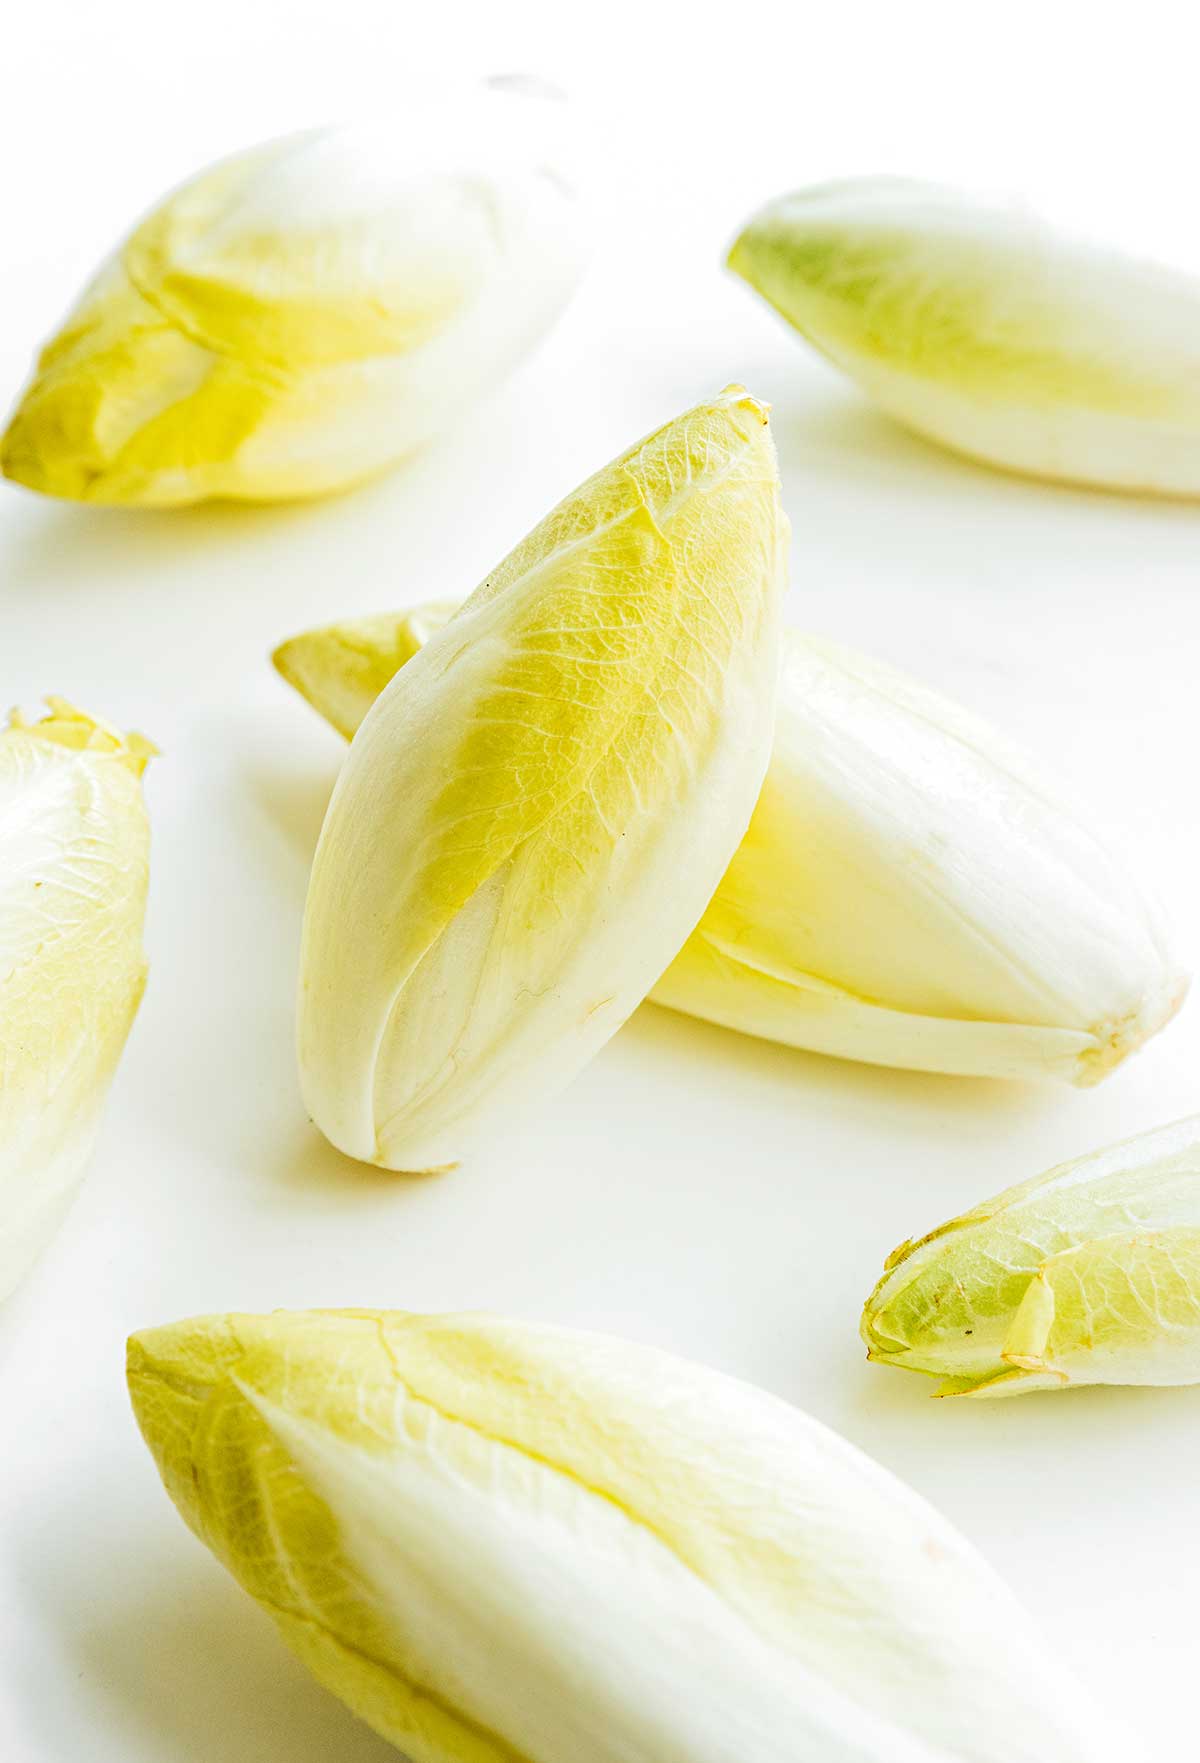 Endive on a white background.